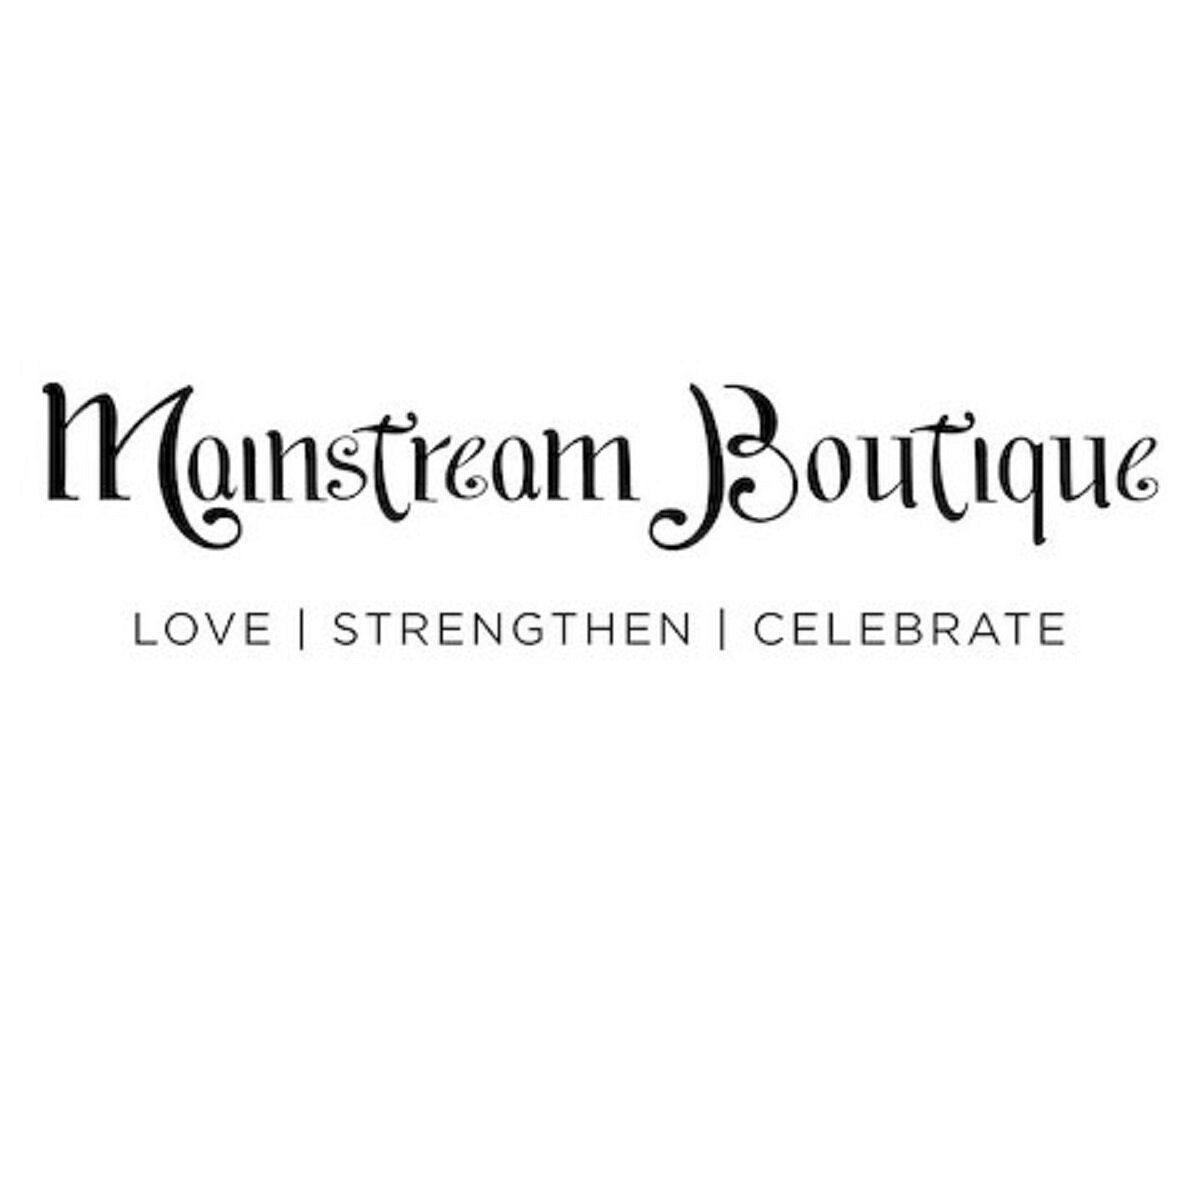 Mainstream Boutique Apple Valley